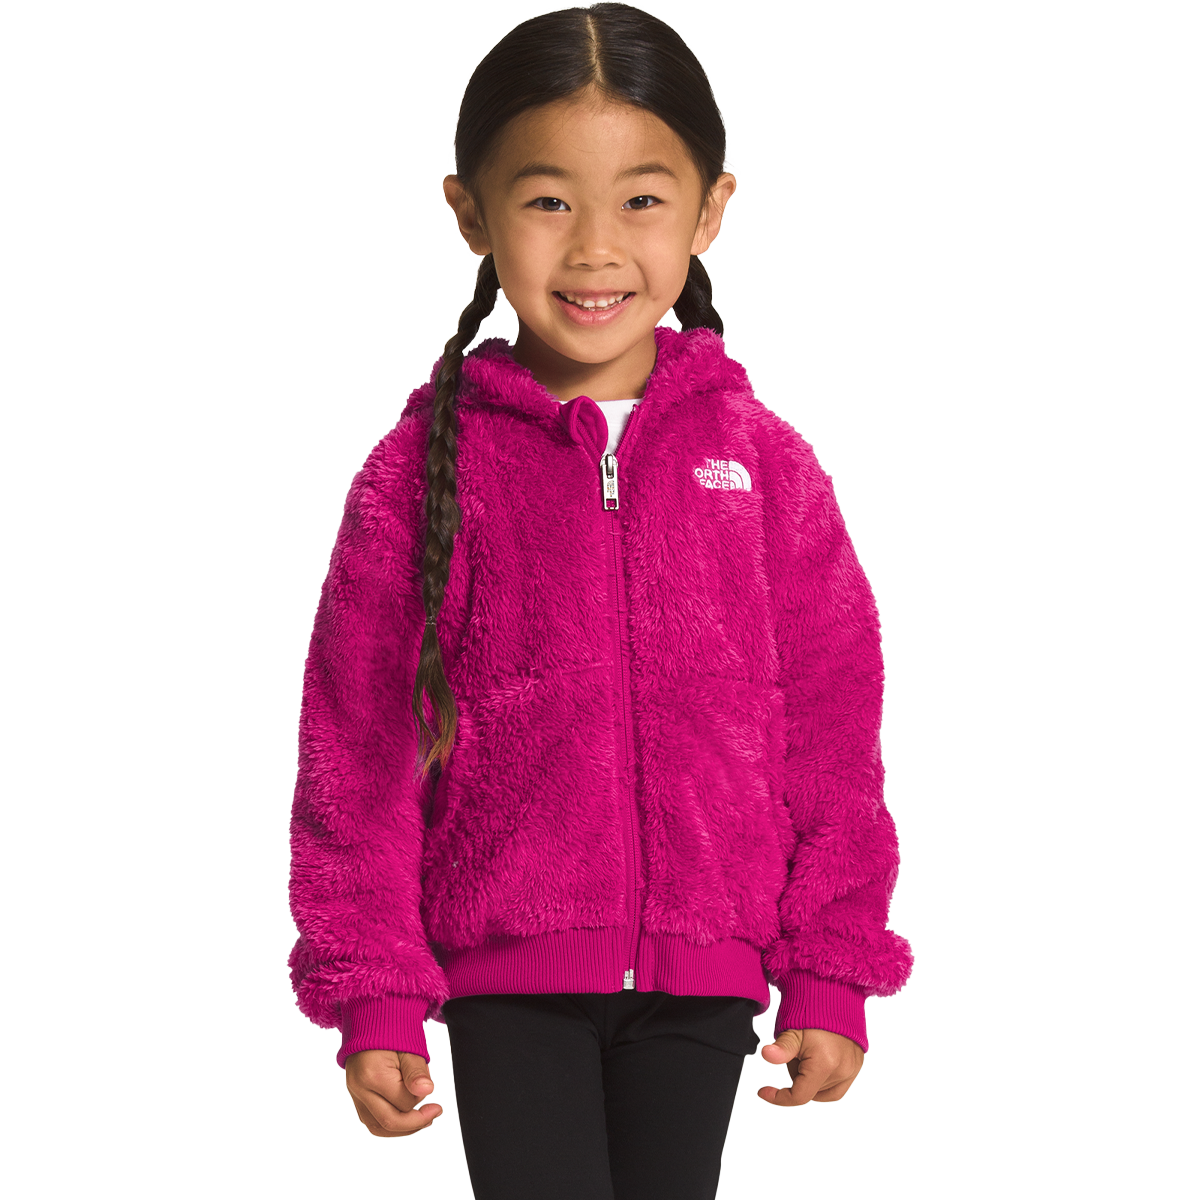 The NORTH FACE OSO OSITO Hoodie Ultra Soft Fleece Jacket Lavender girls L  14/16 